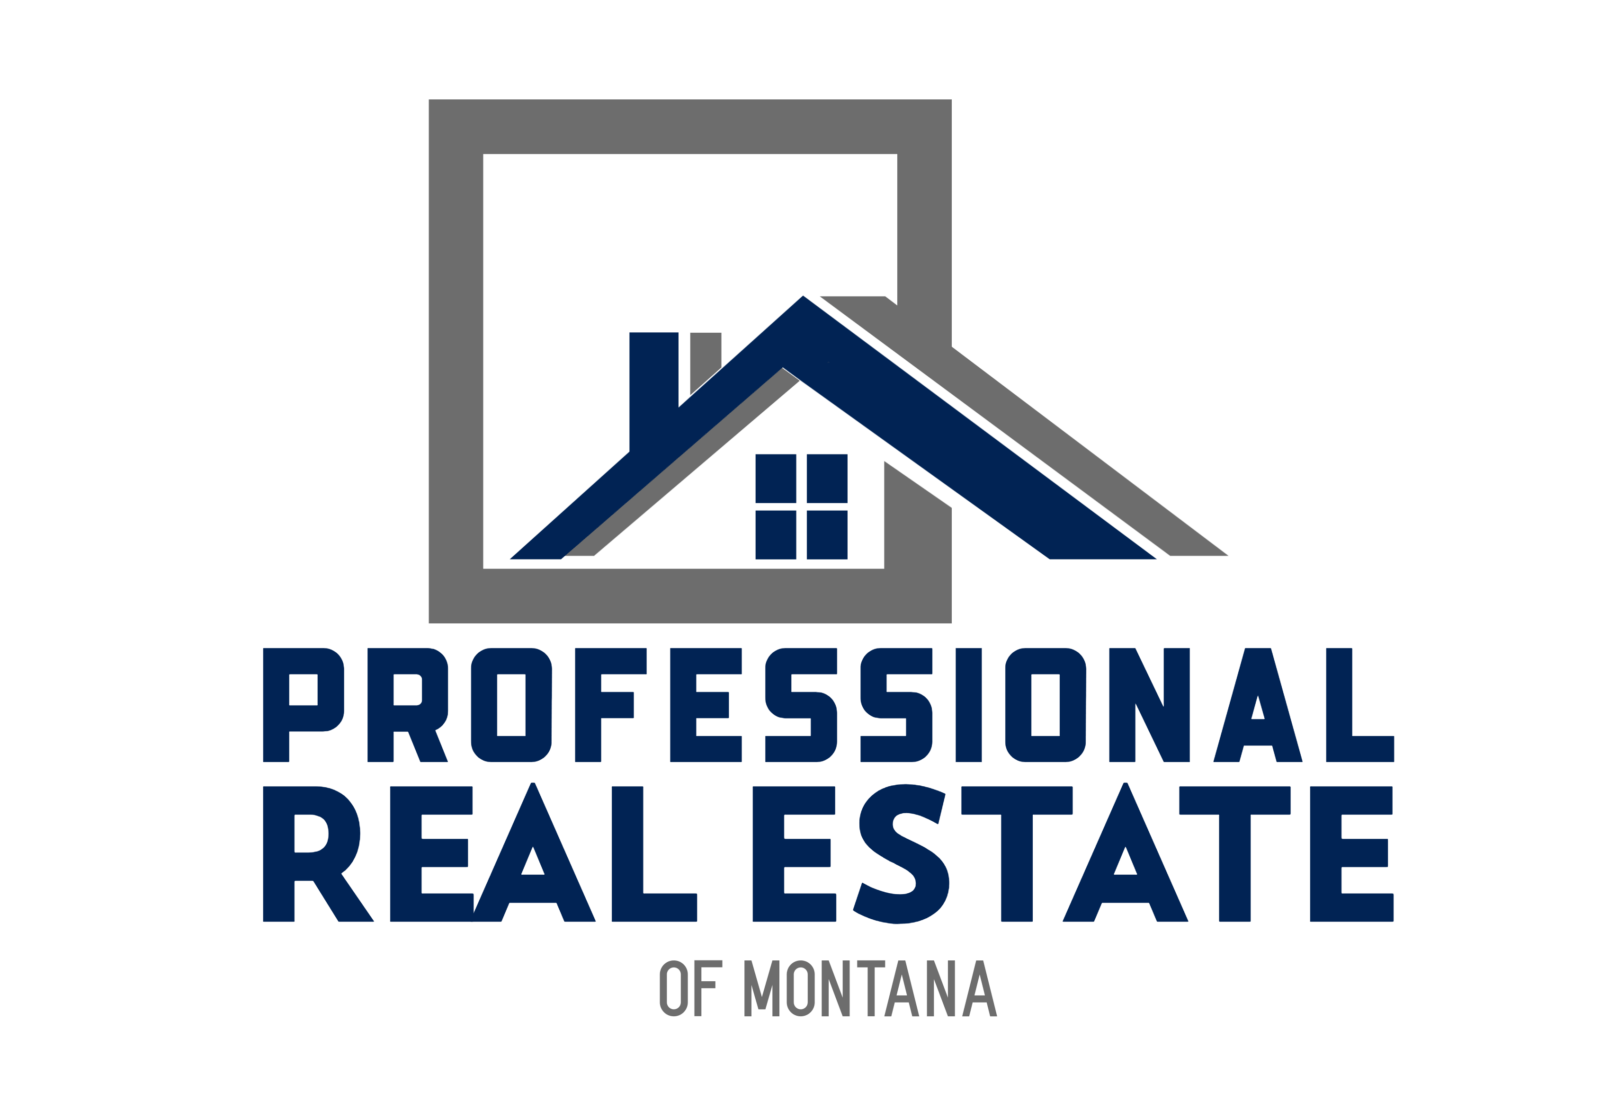 Professional Real Estate of Montana